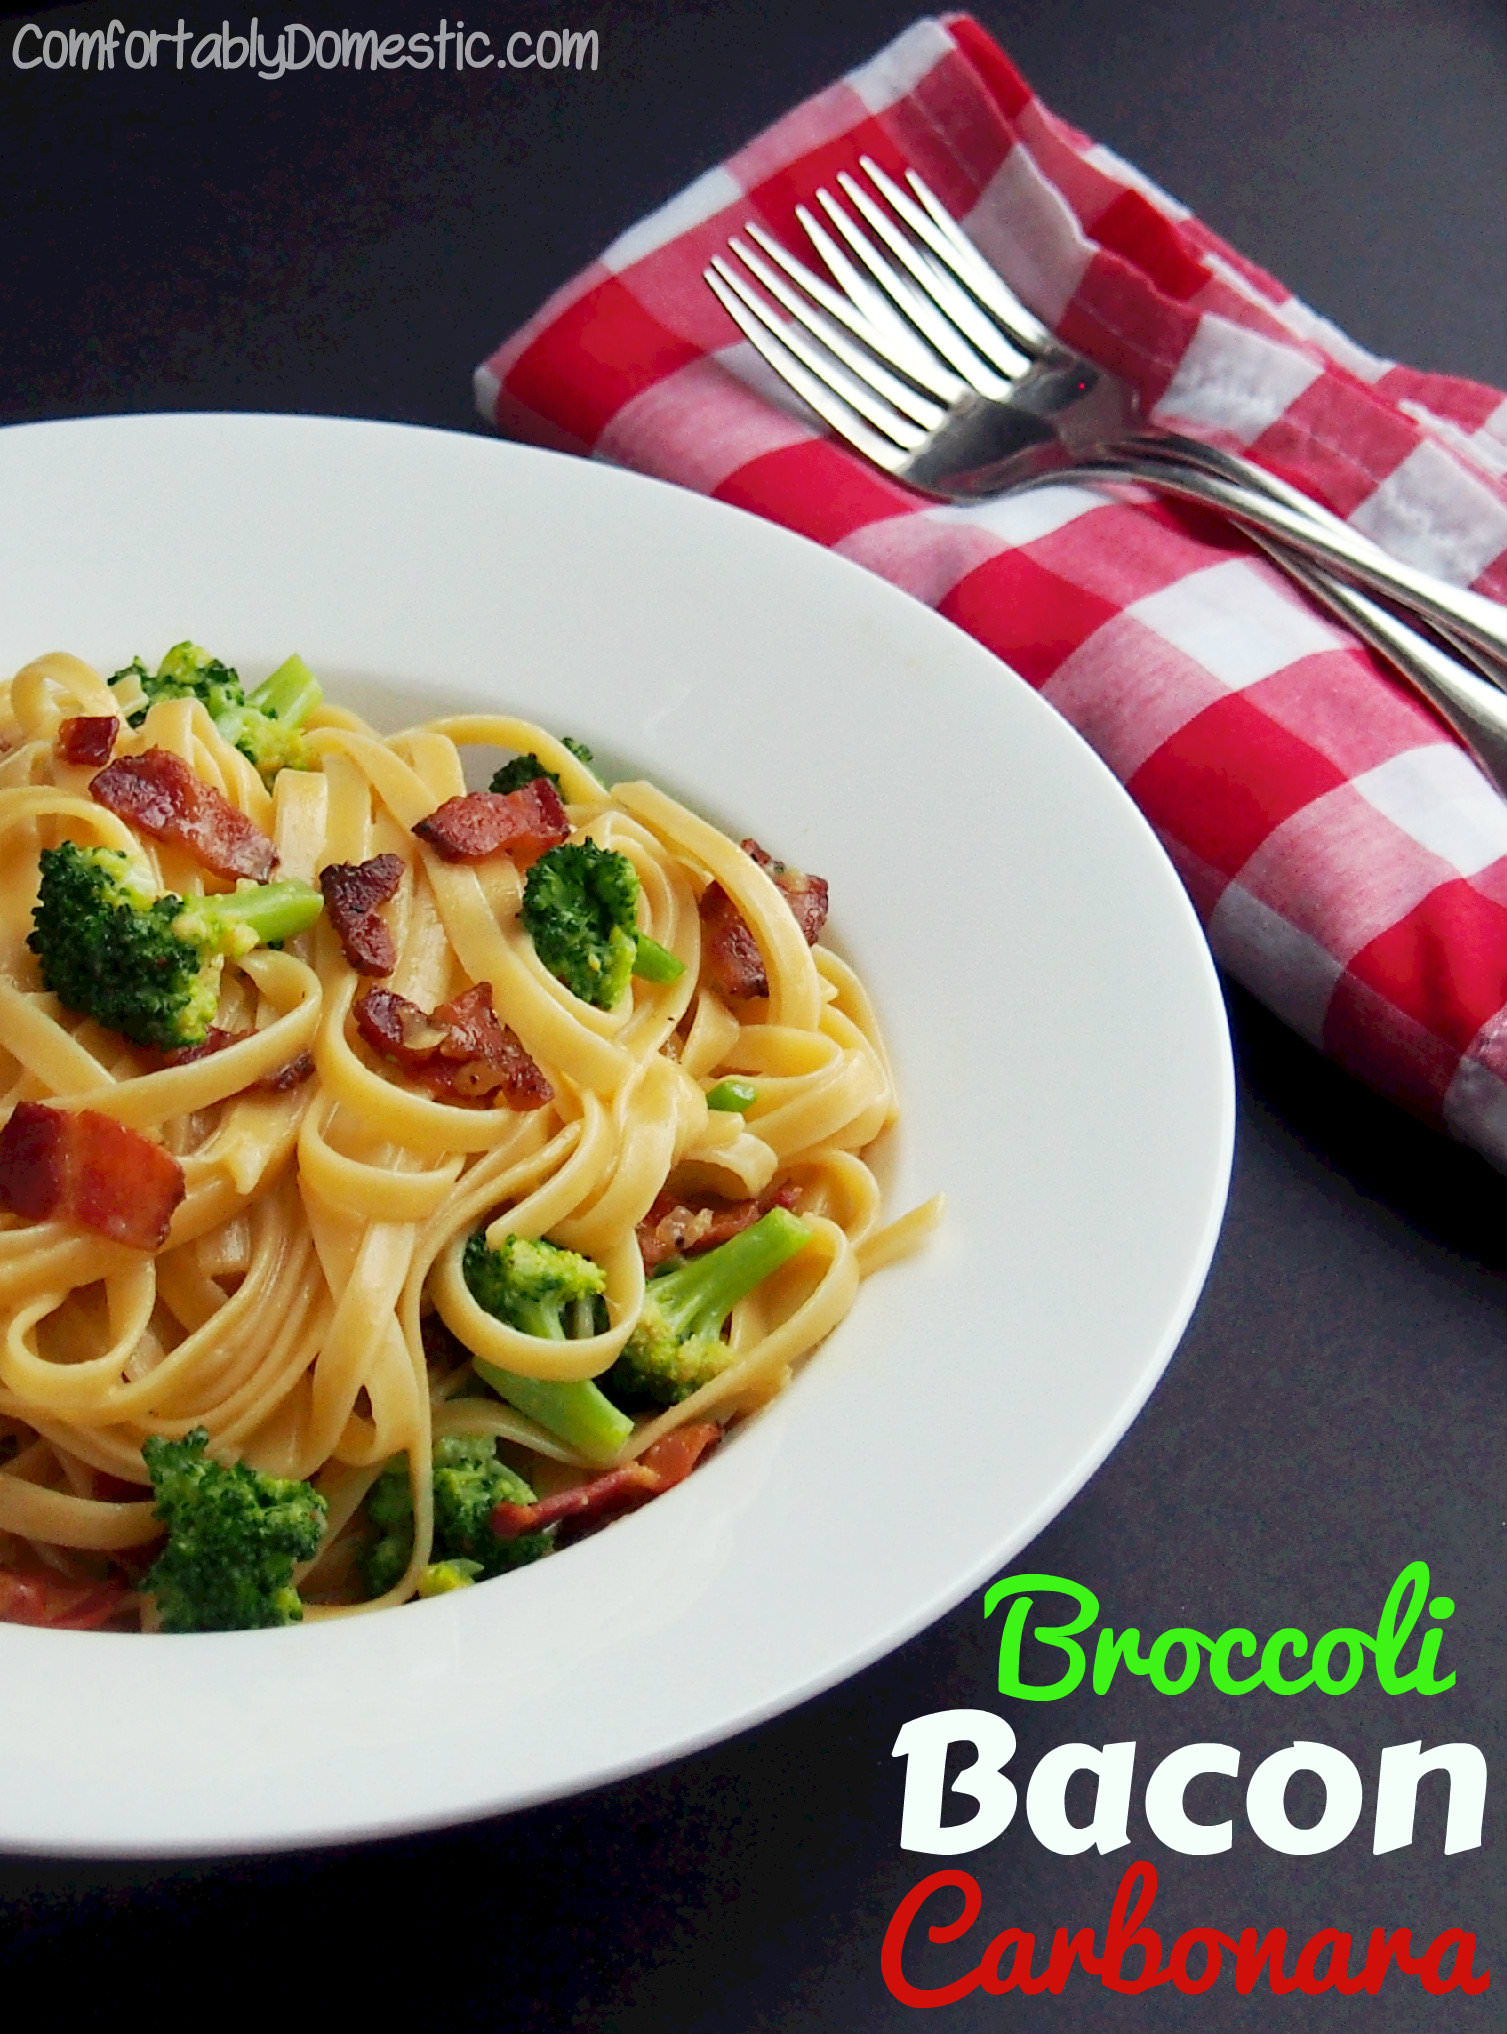 Broccoli bacon pasta carbonara is an inexpensive yet impressive meal, made with fresh broccoli, thick-cut pepper bacon, eggs, and plenty of cheese. | ComfortablyDomestic.com